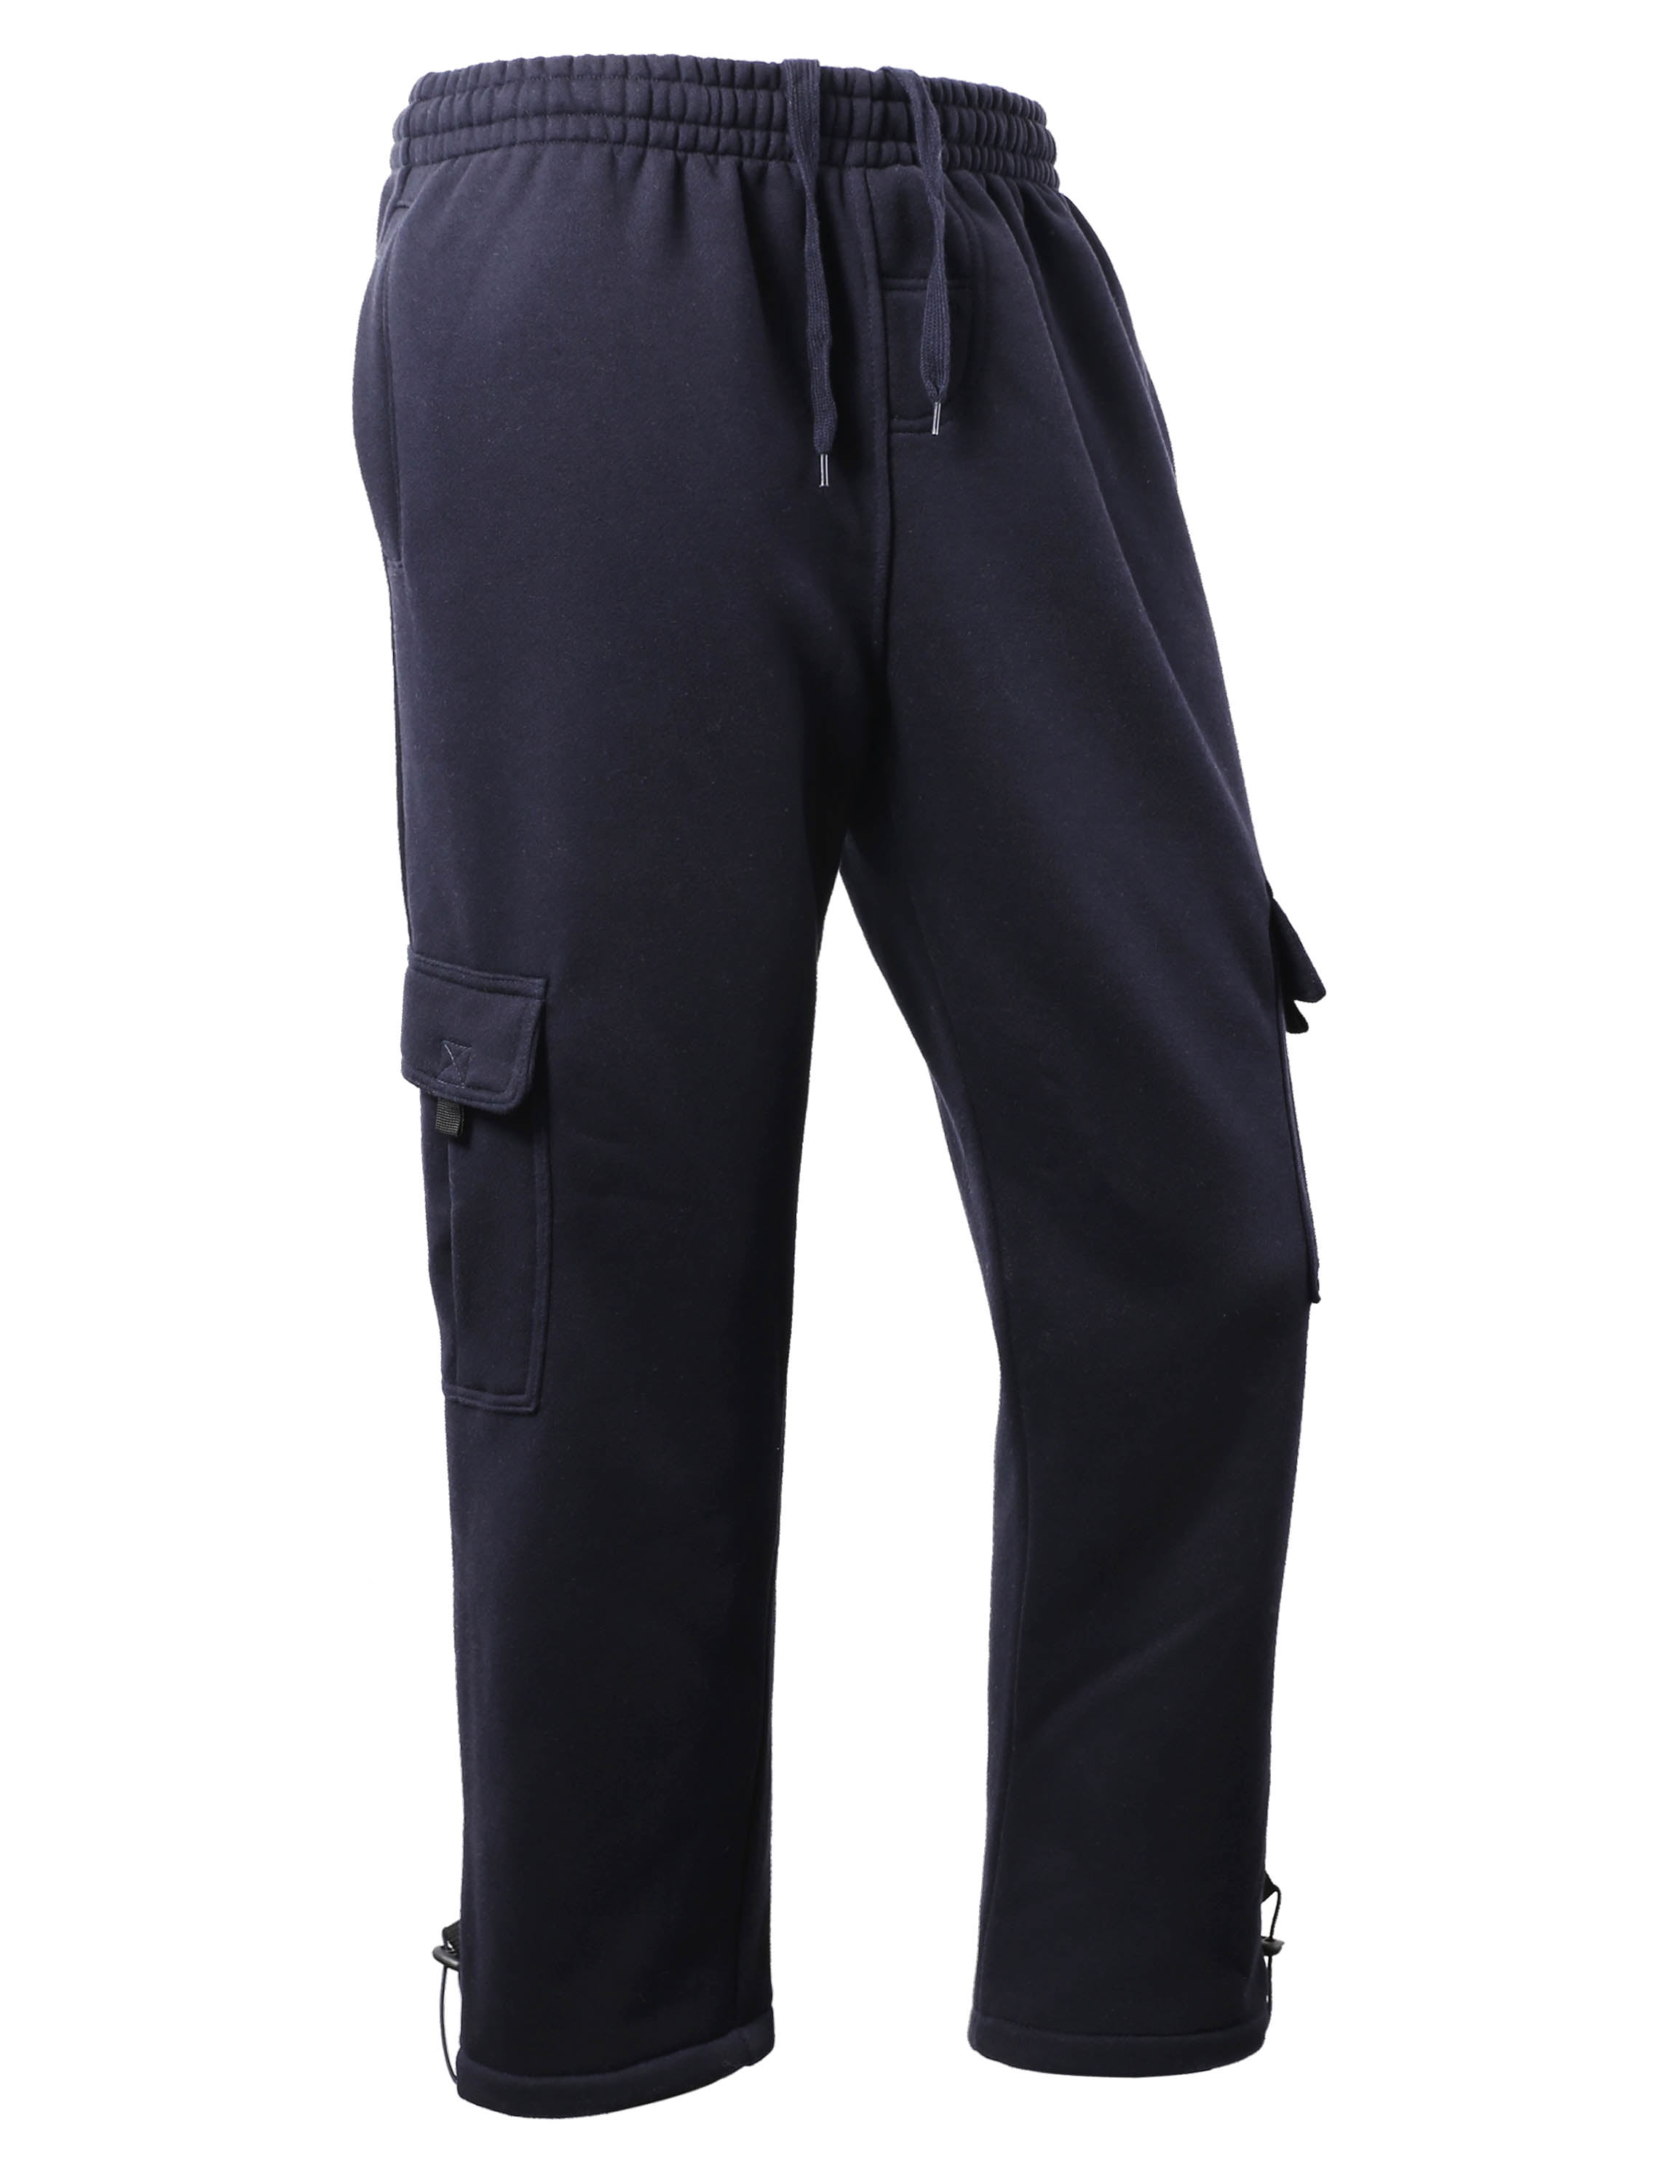 Hat and Beyond - Men's Utility Heavyweight Fleece Cargo Sweatpants with ...